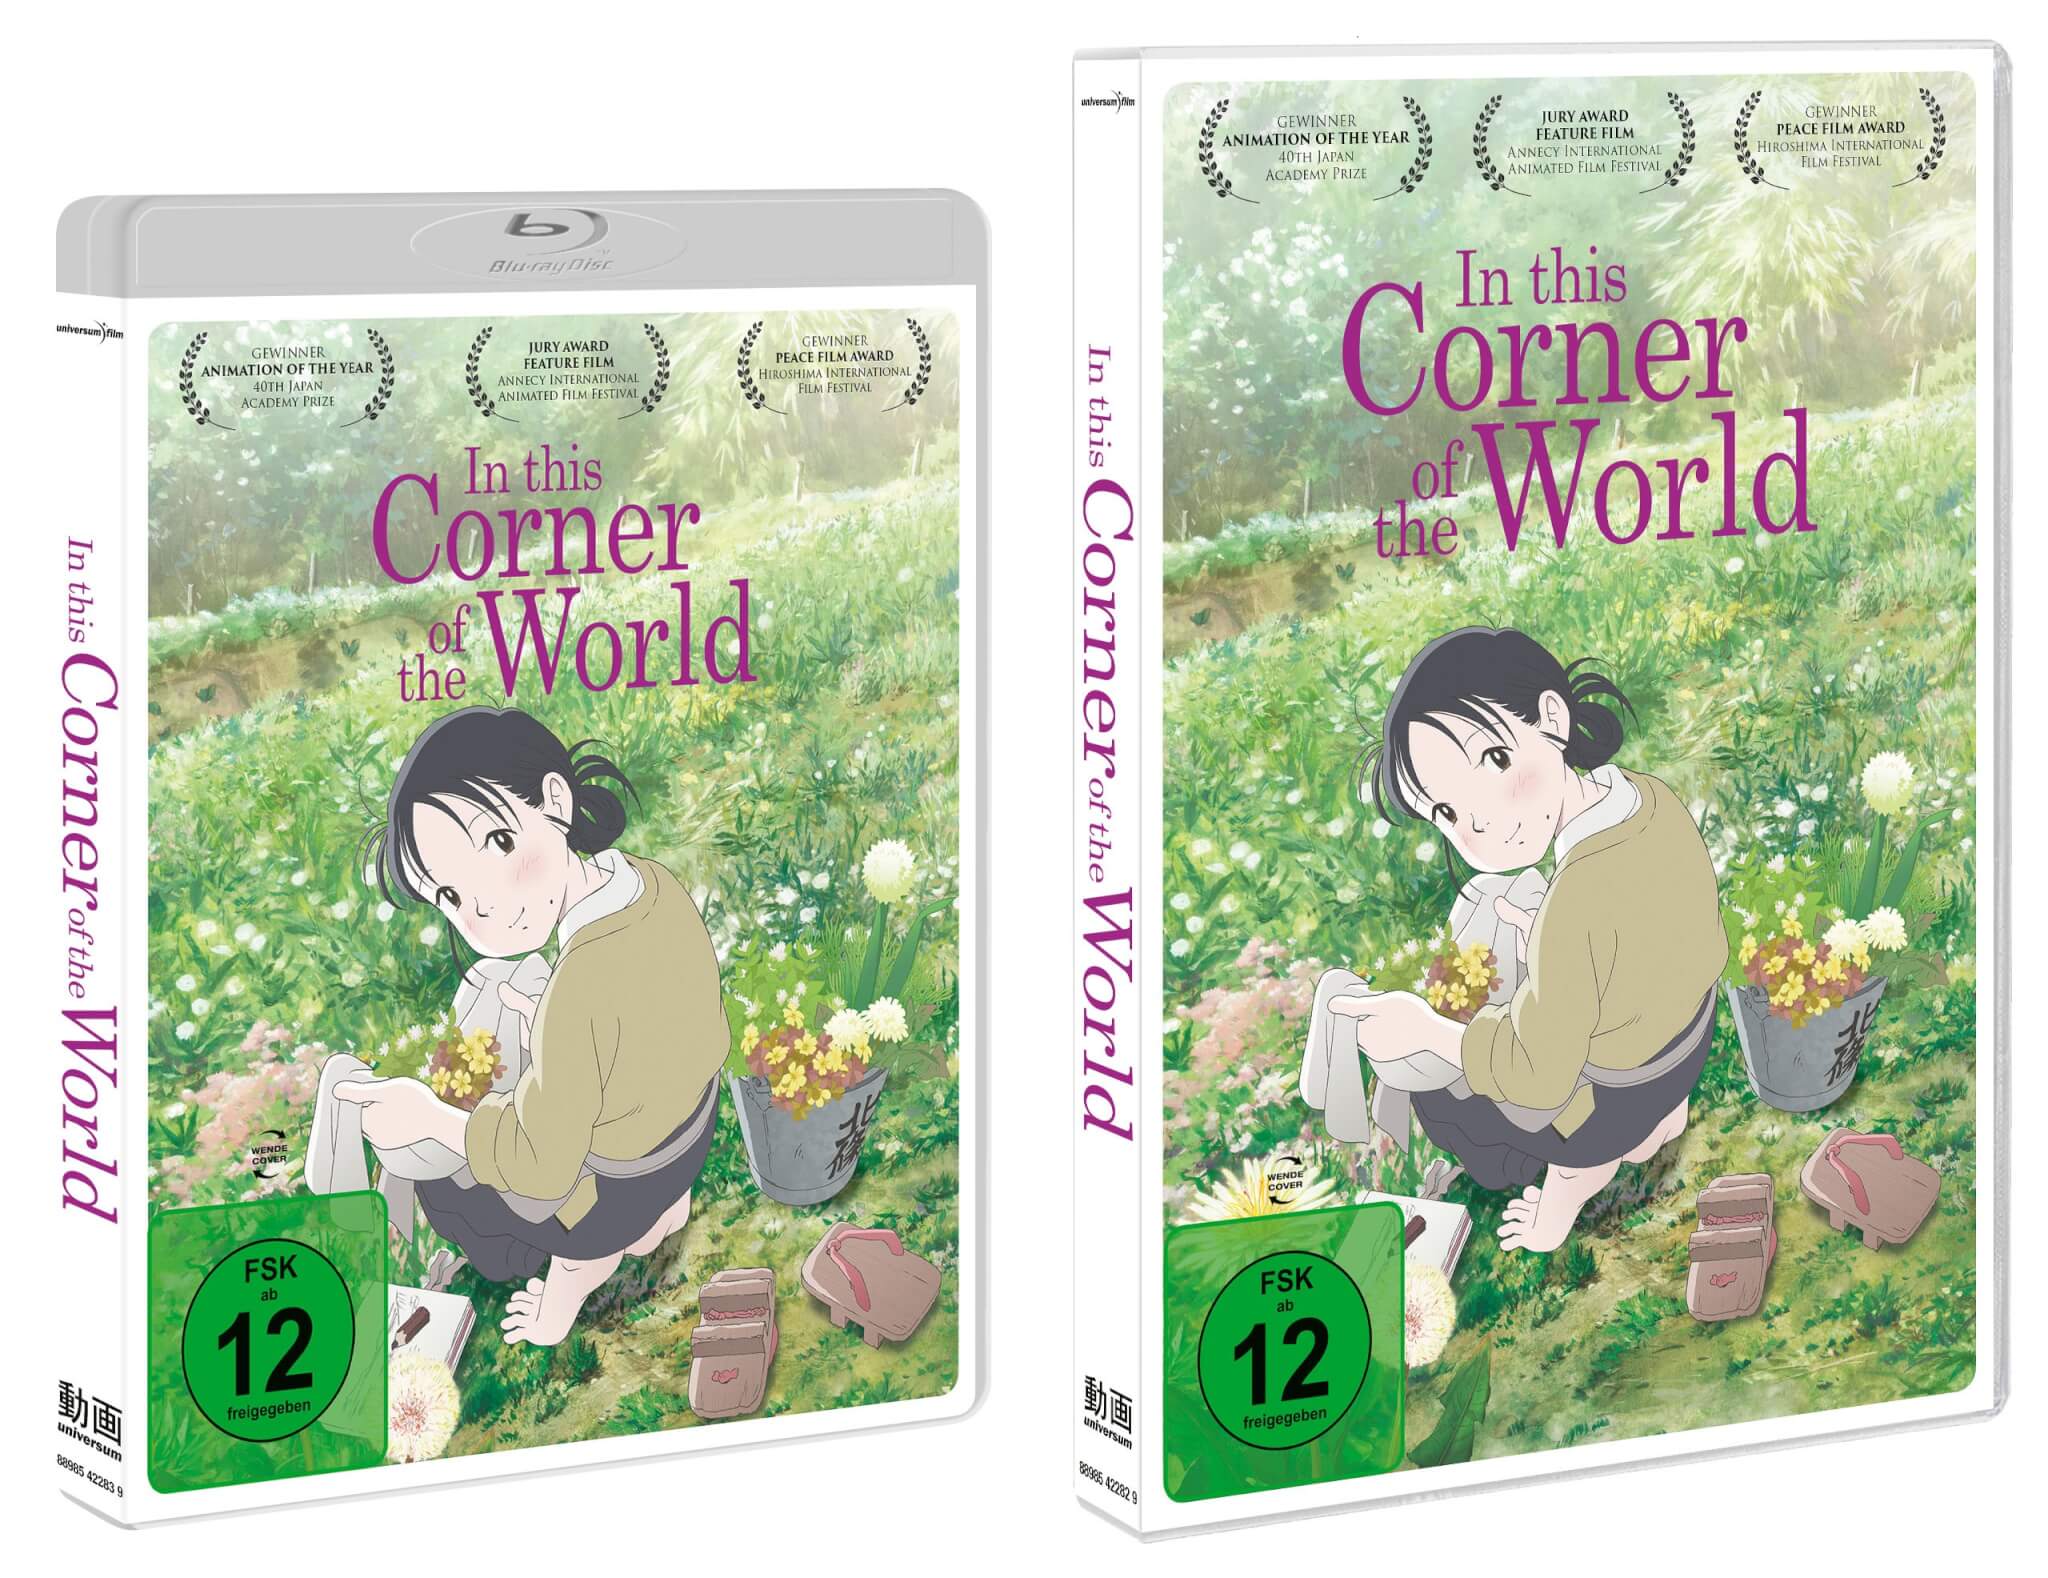 In this Corner of the World Packshots